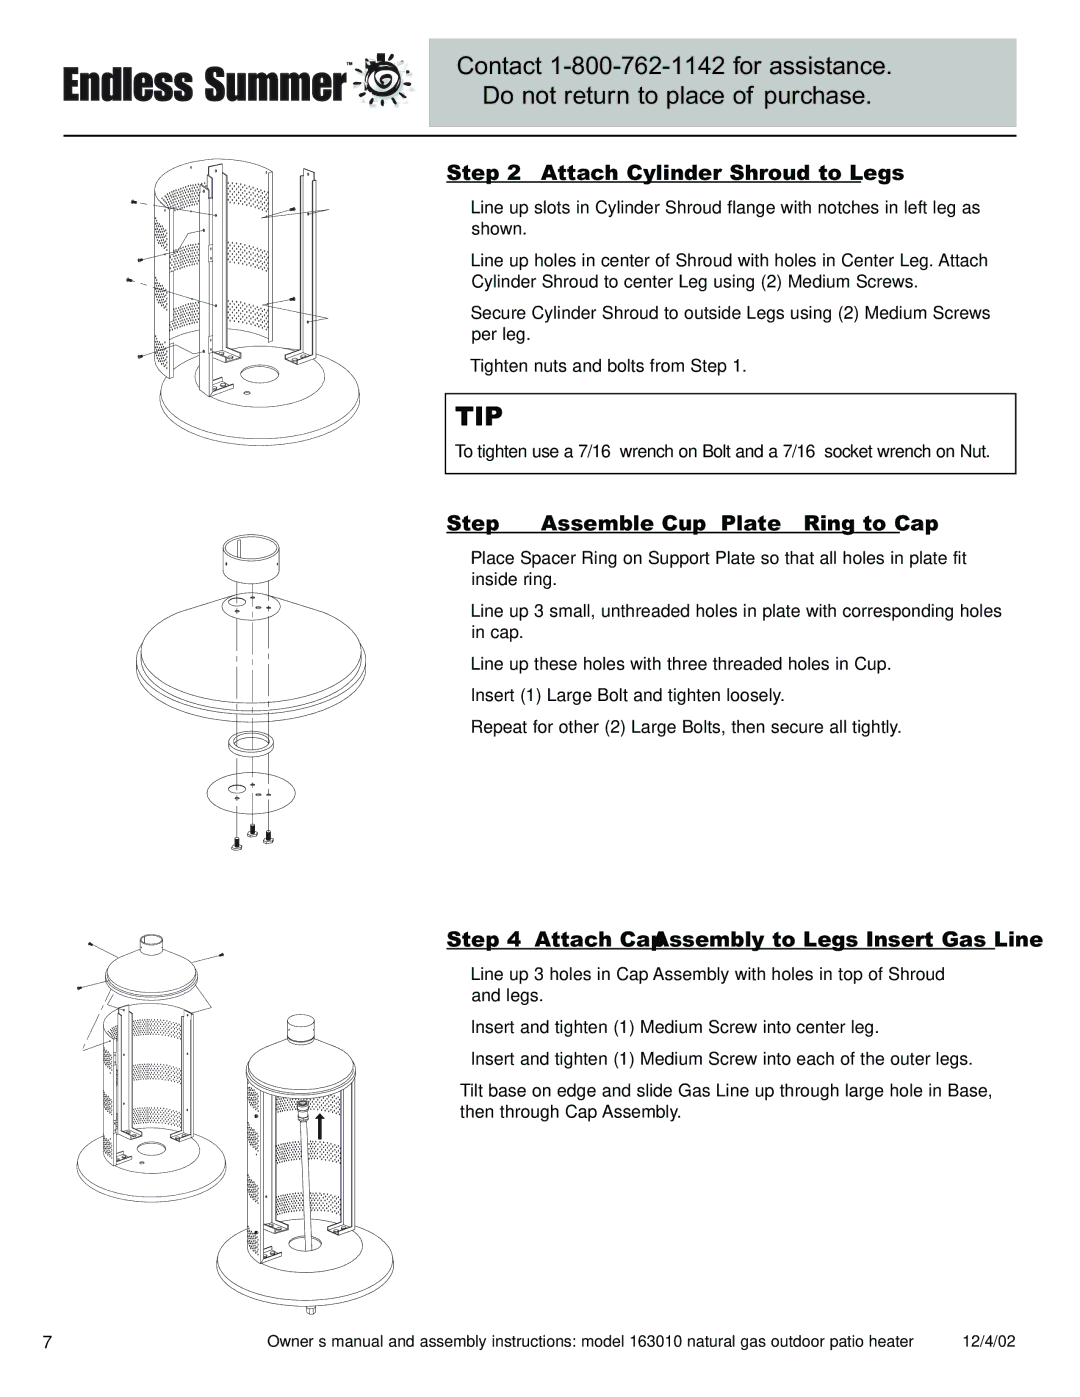 Blue Rhino 163010 owner manual Attach Cylinder Shroud to Legs, Assemble Cup, Plate & Ring to Cap 